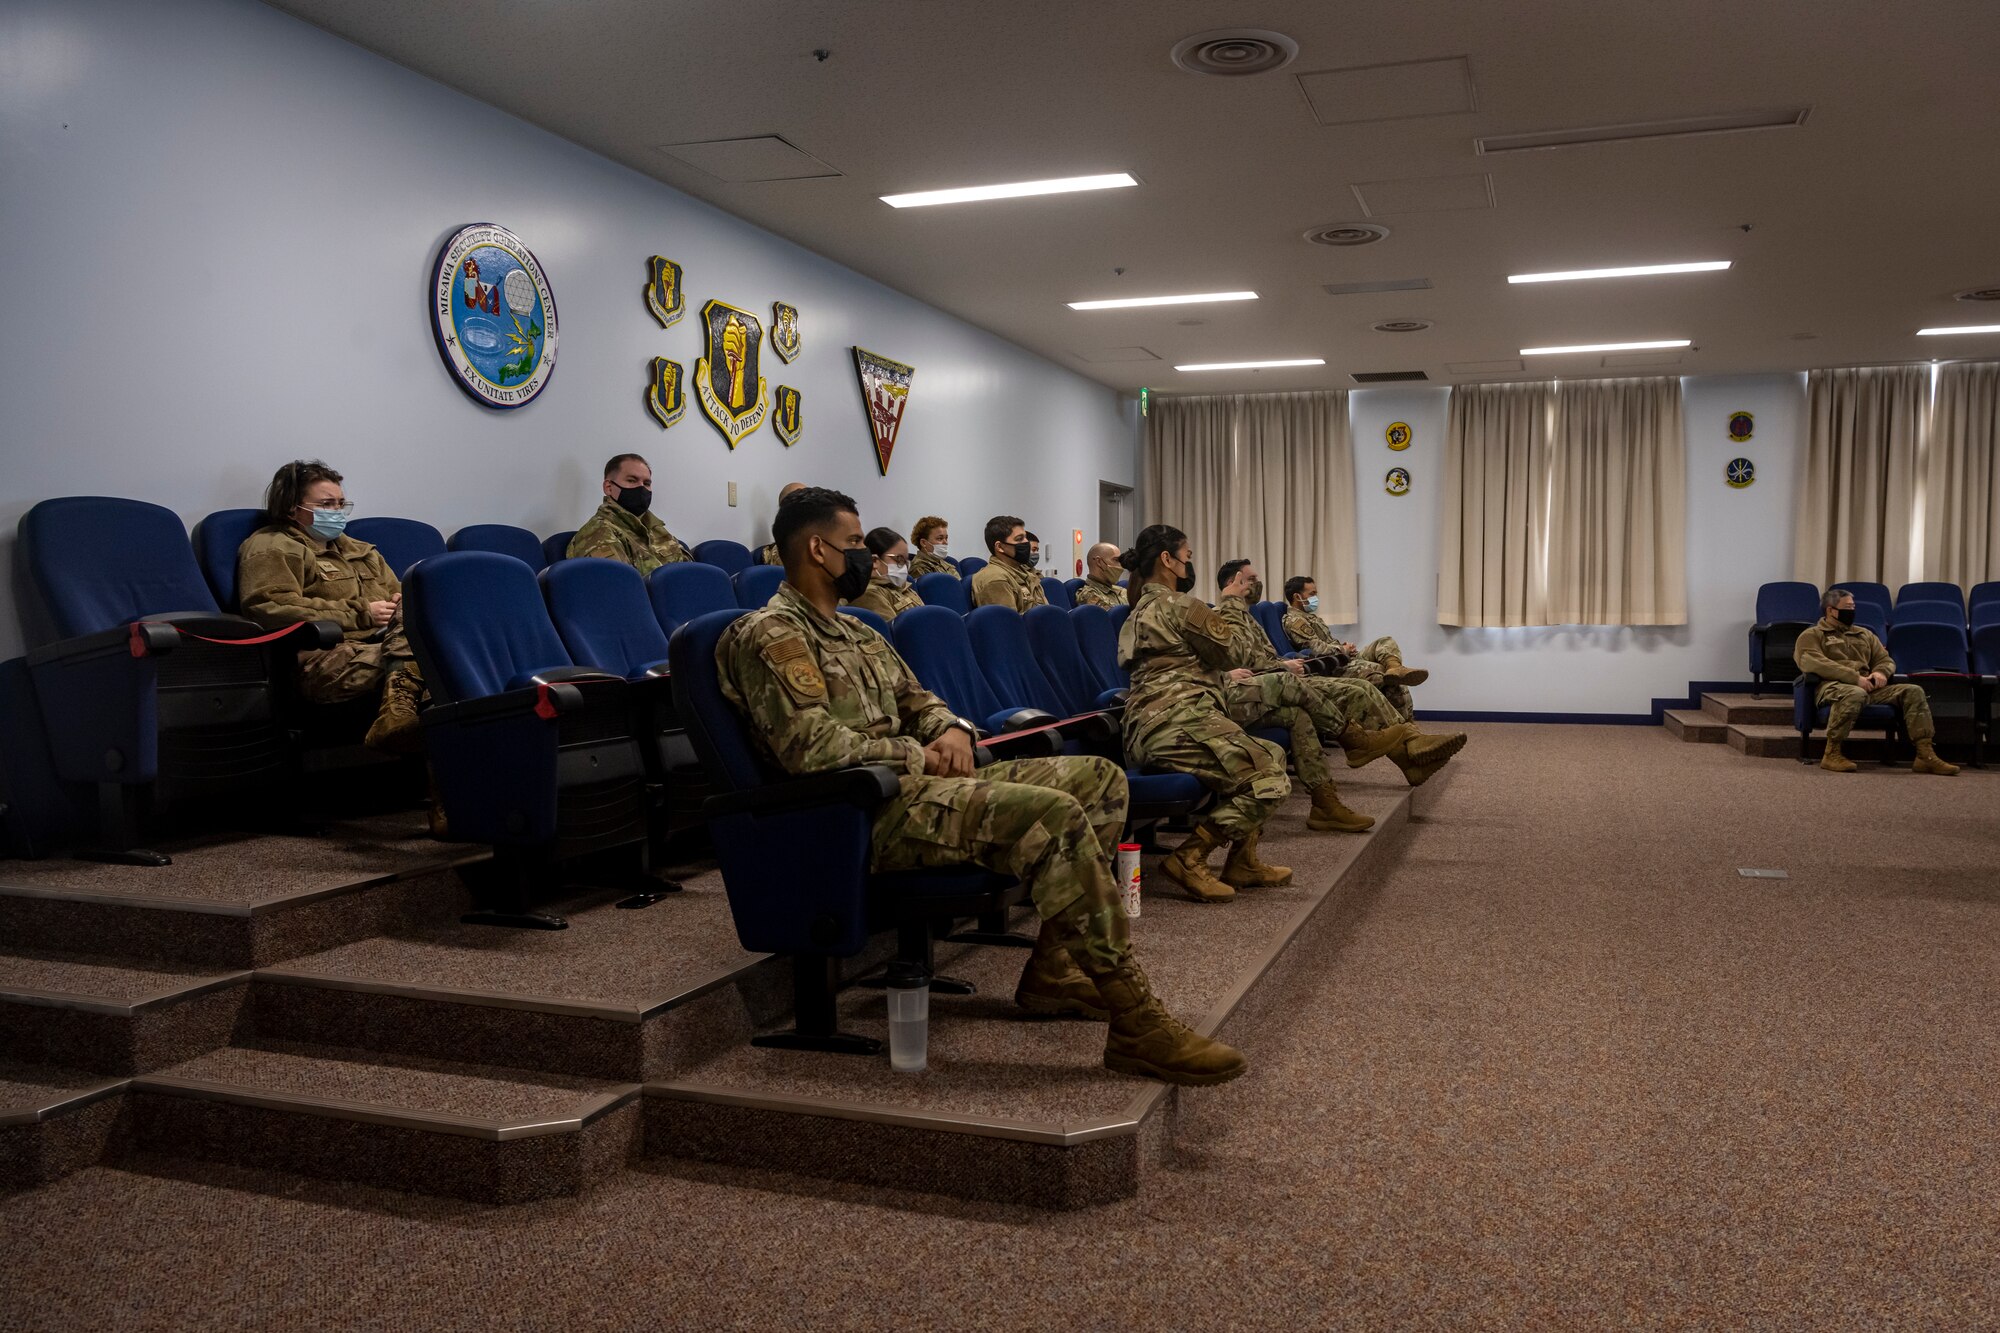 Airmen in a conference room listening to a virtual call.